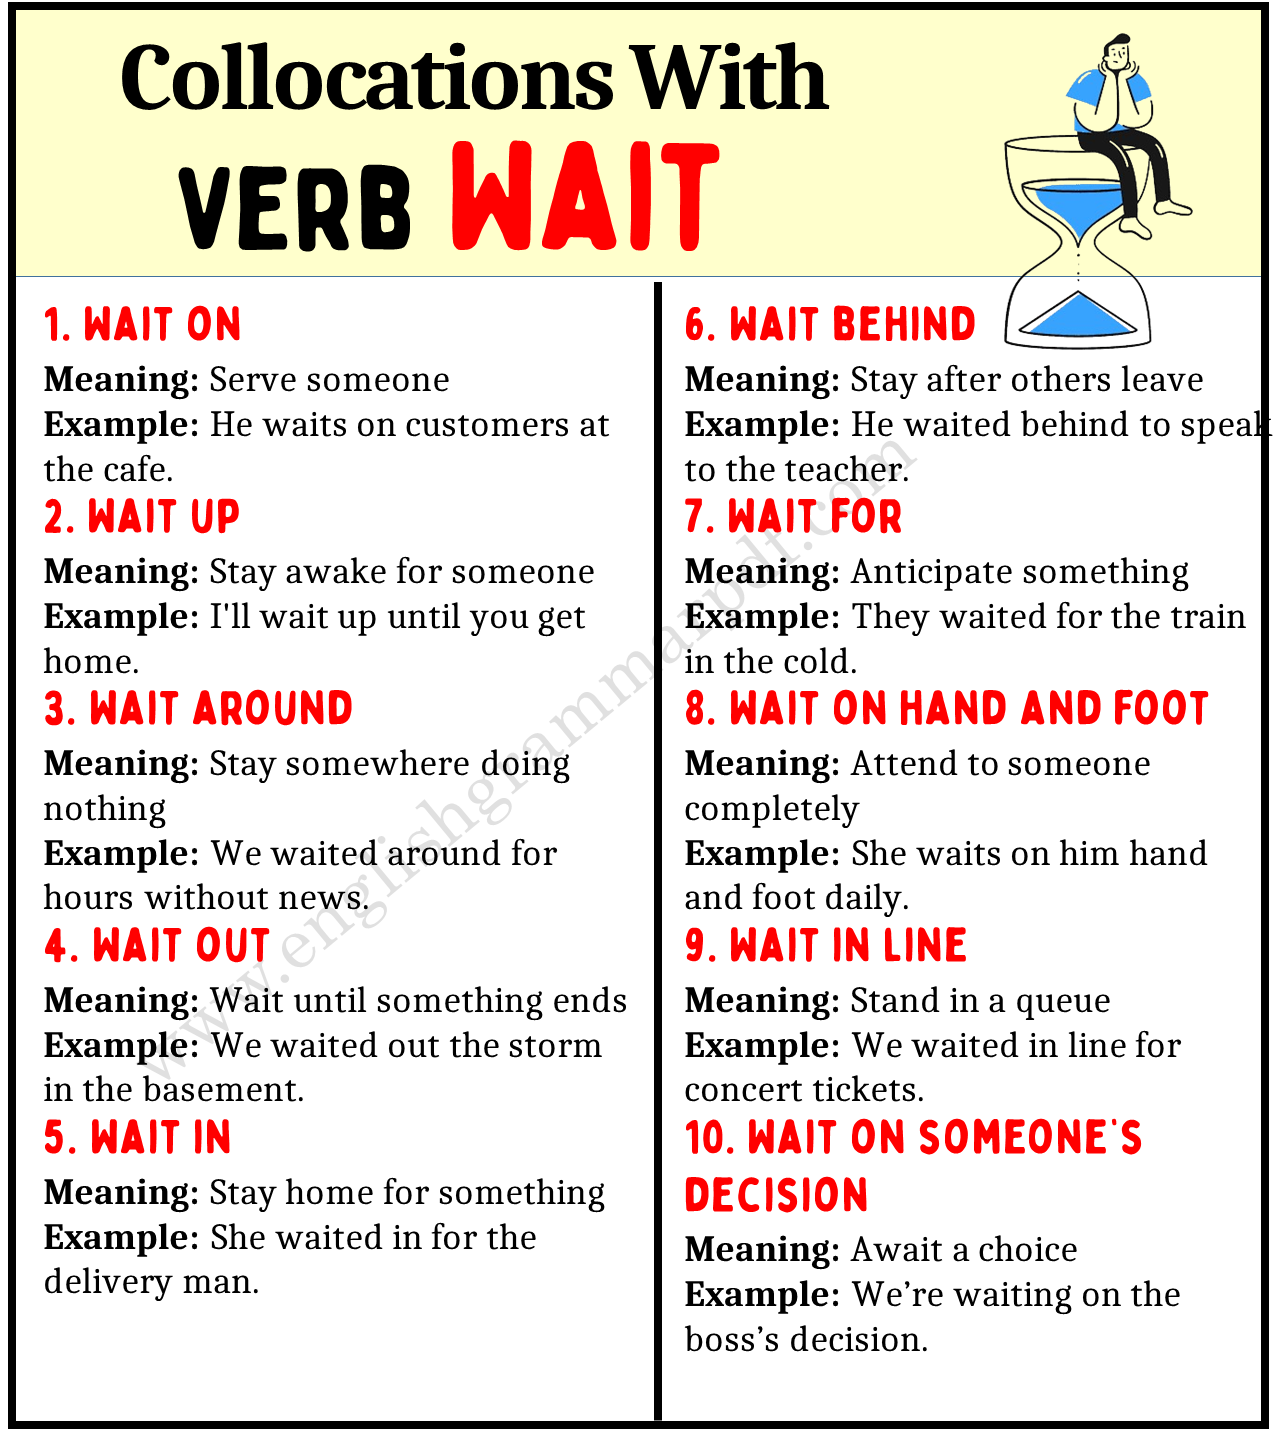 Collocations With Verb WAIT